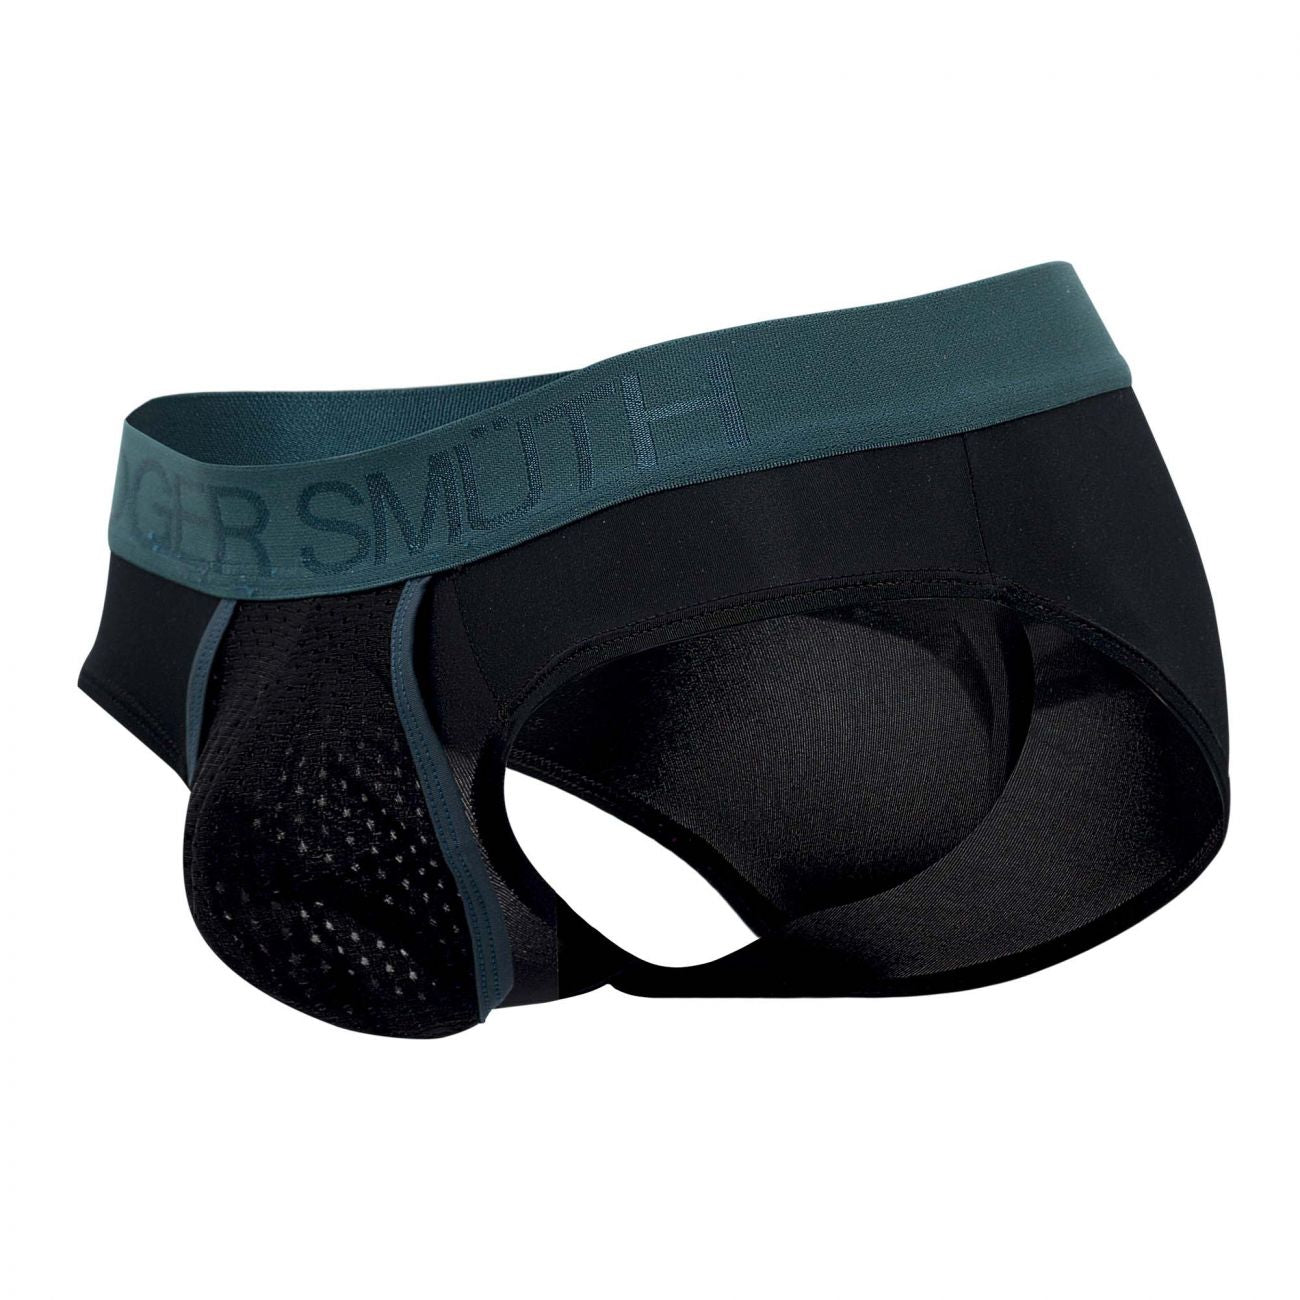 Roger Smuth RS023 Briefs